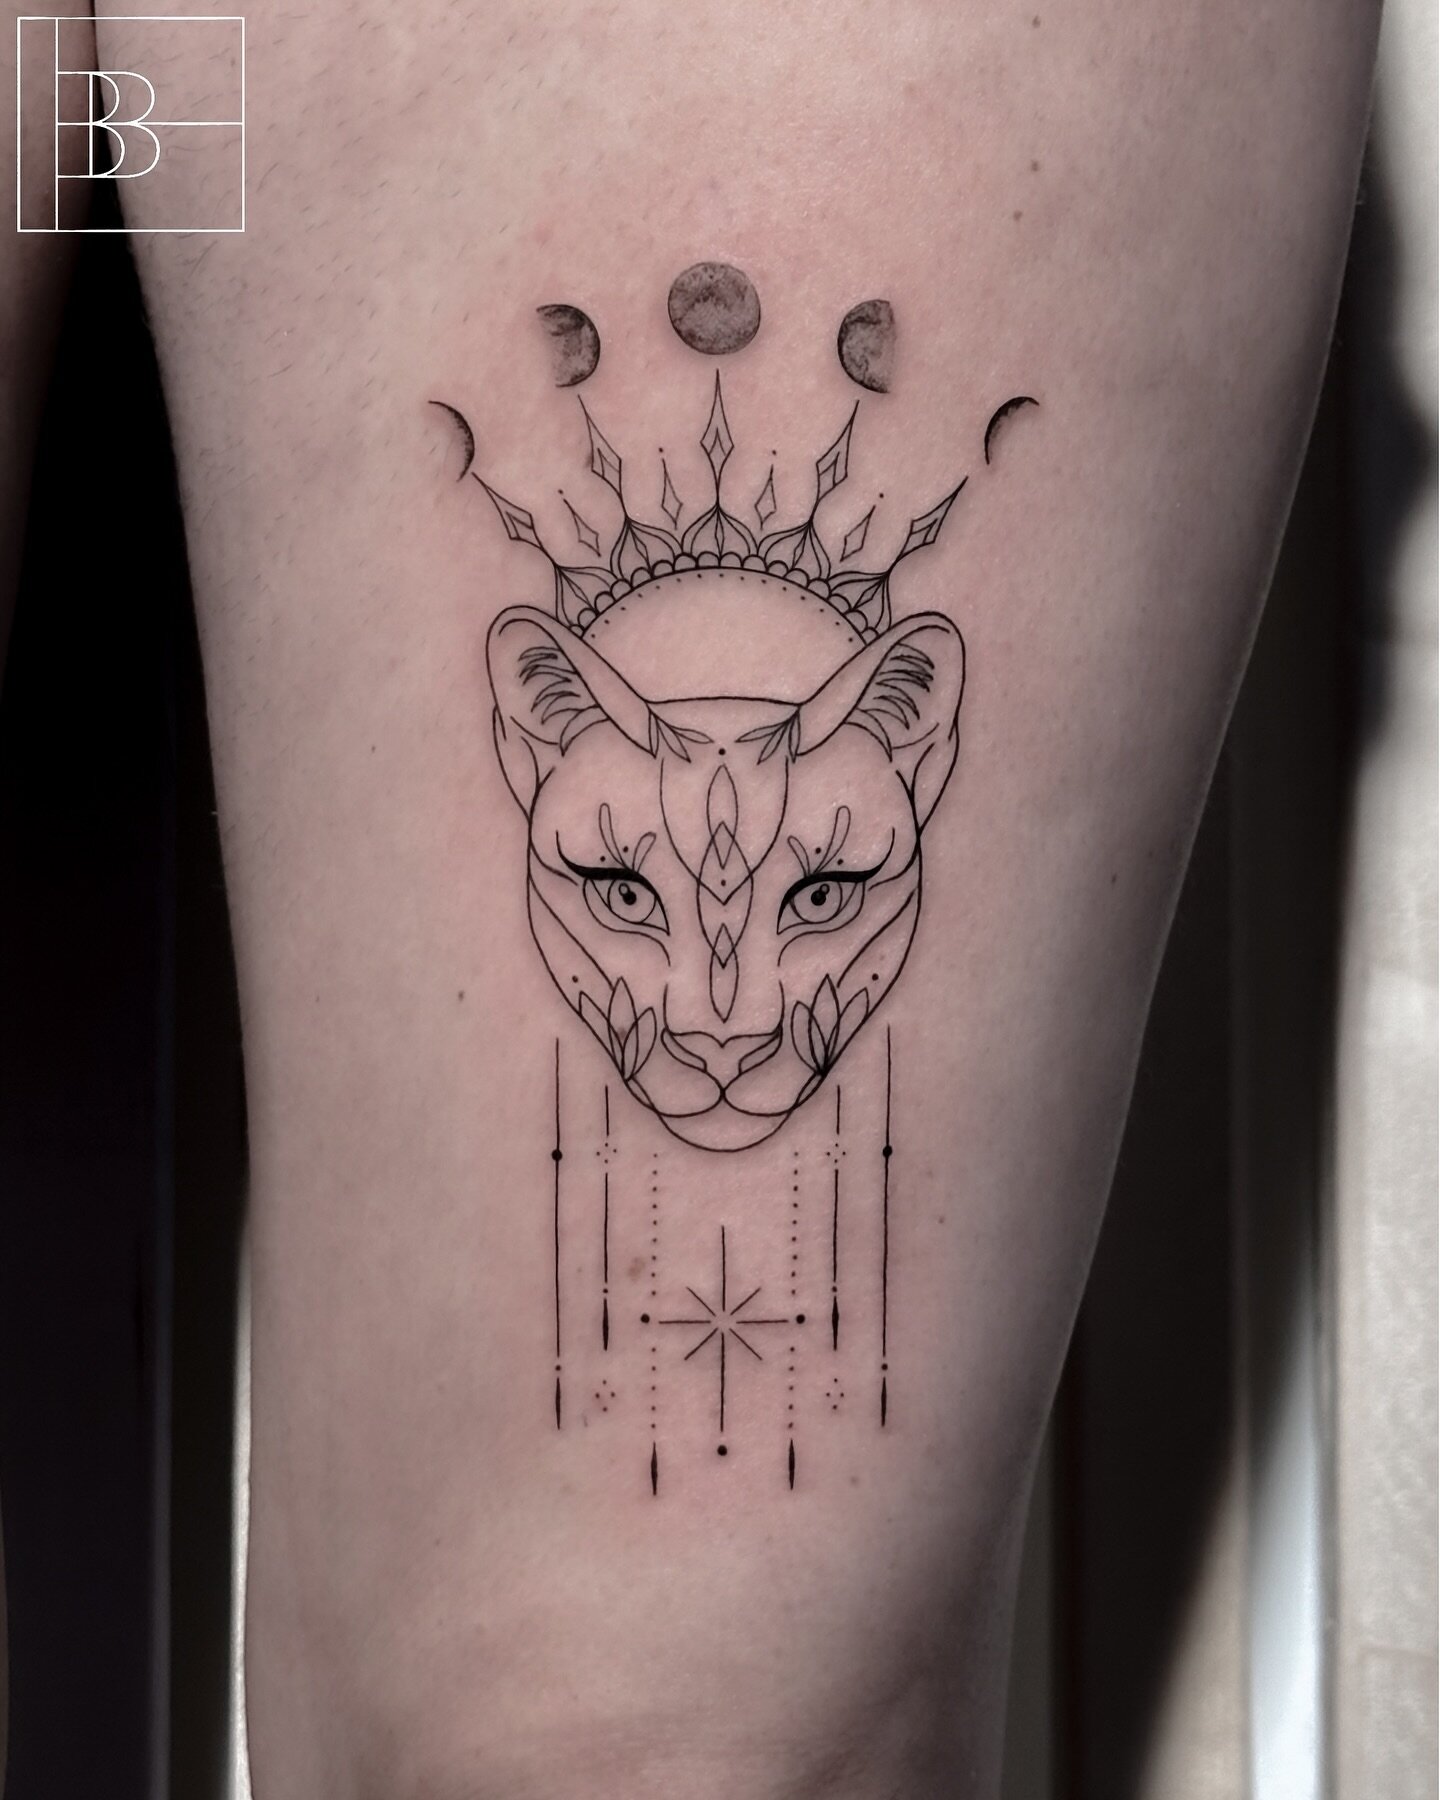 For Malia!🖤 Guided by moonlight, crowned in cosmic power. 🌒✨

&bull;

#LunarLioness #lionesstattoo
#finelinetattoo #cosmic #vegantattoo #lunartattoo #tattooinspiration #tattoolosangeles #womentattooartist